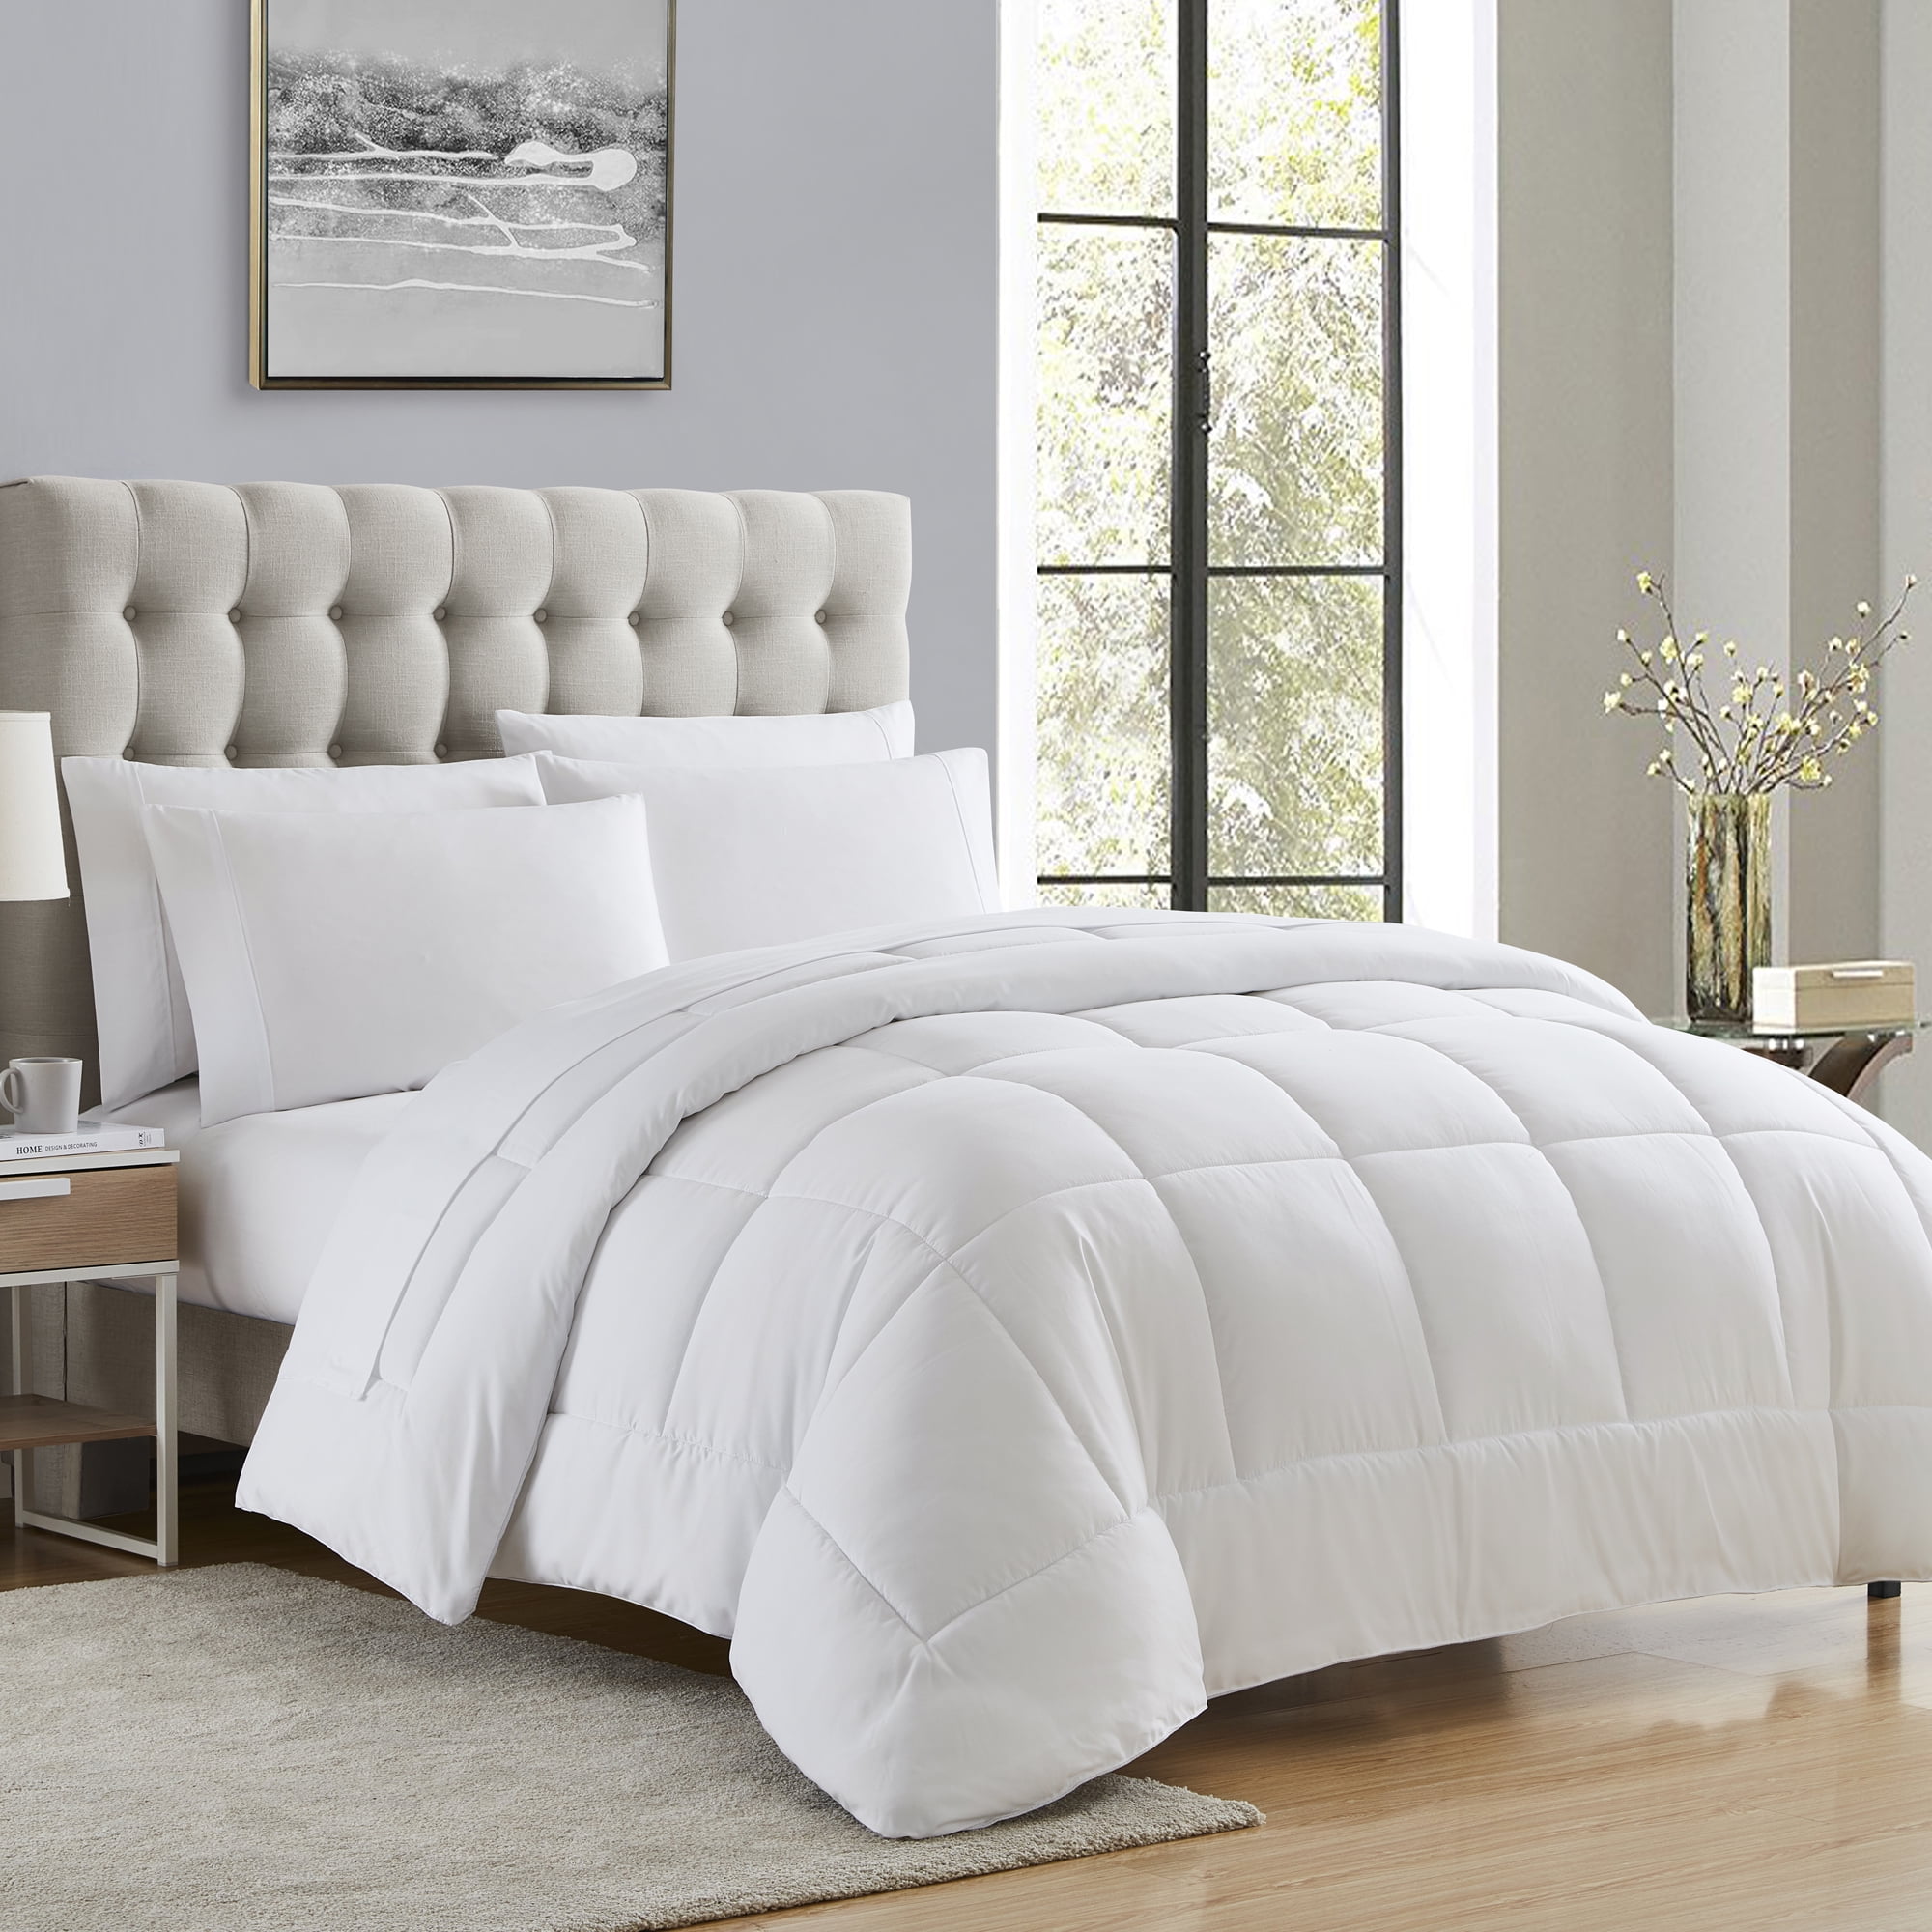 Empire Home Essentials Down Reversible 7 piece comforter With Sheet White/Gray 